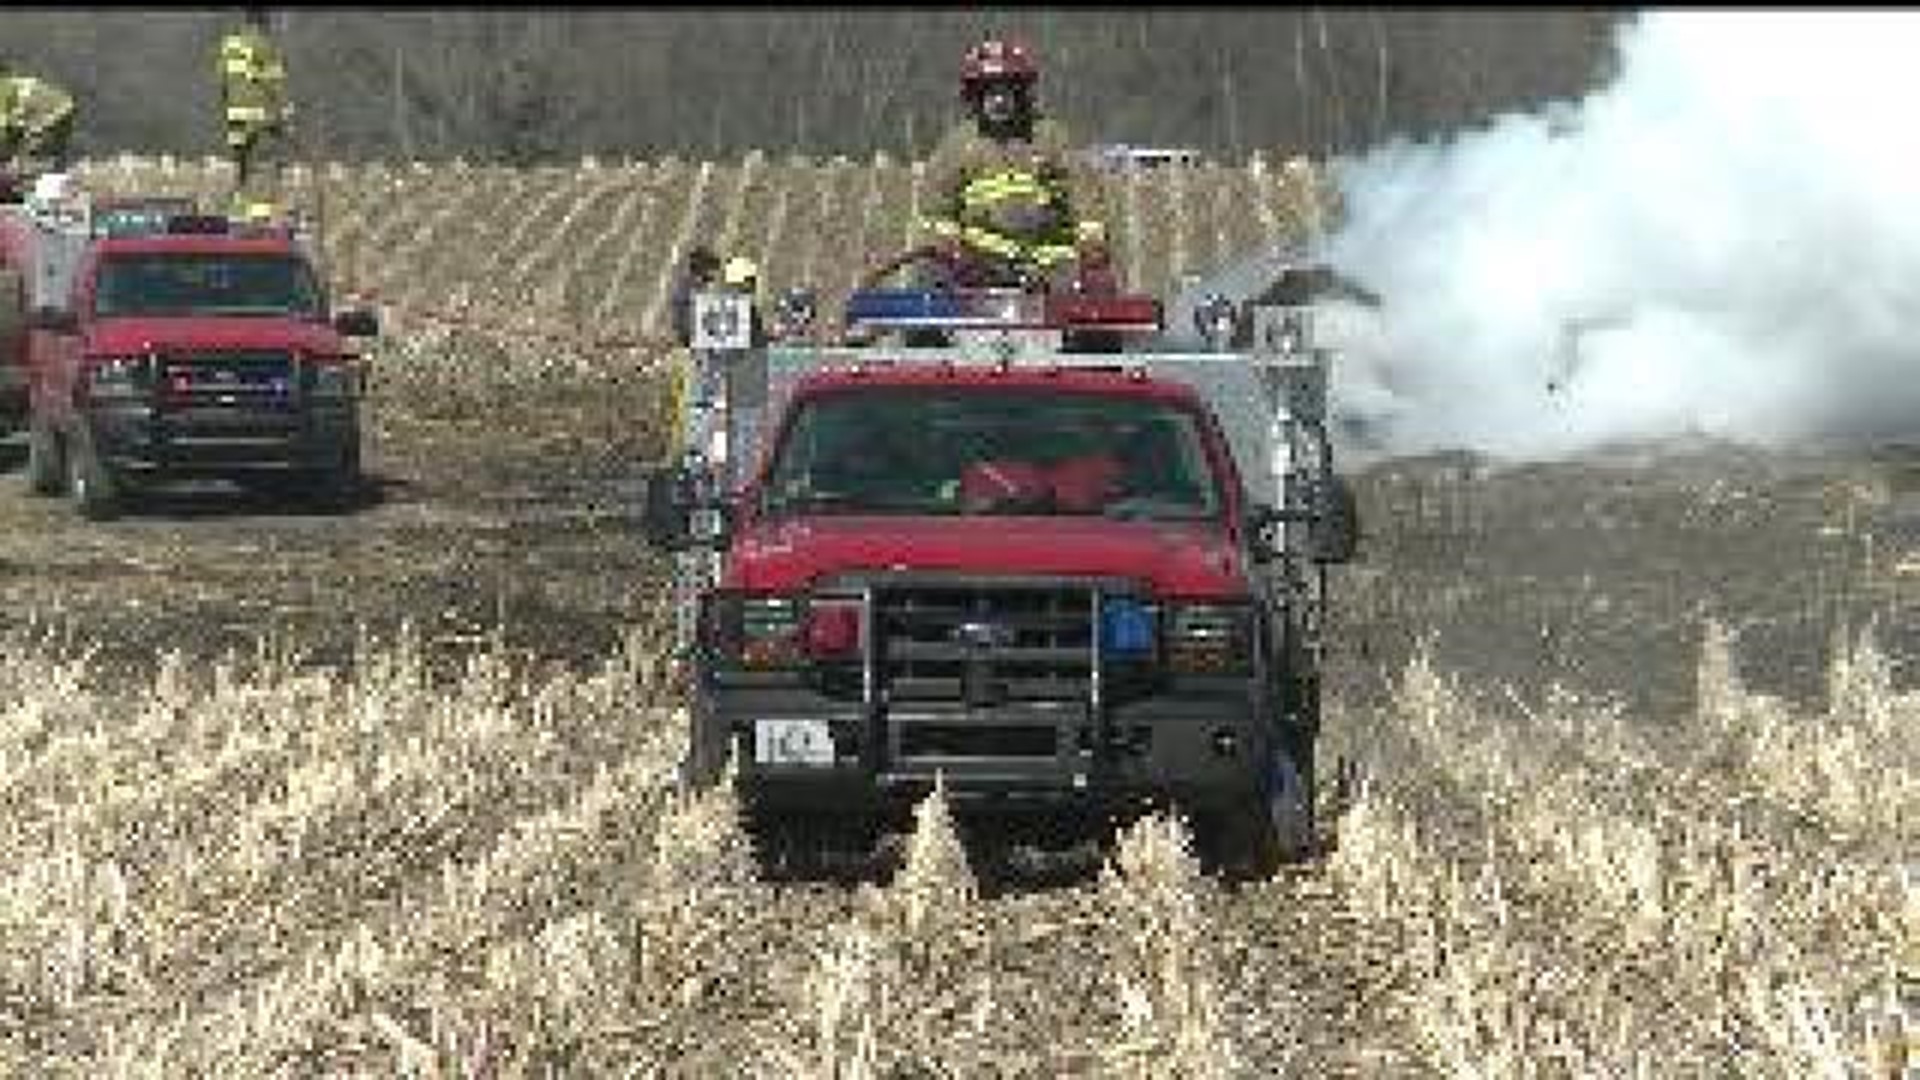 Crews put out two Iowa fires caused by burning brush